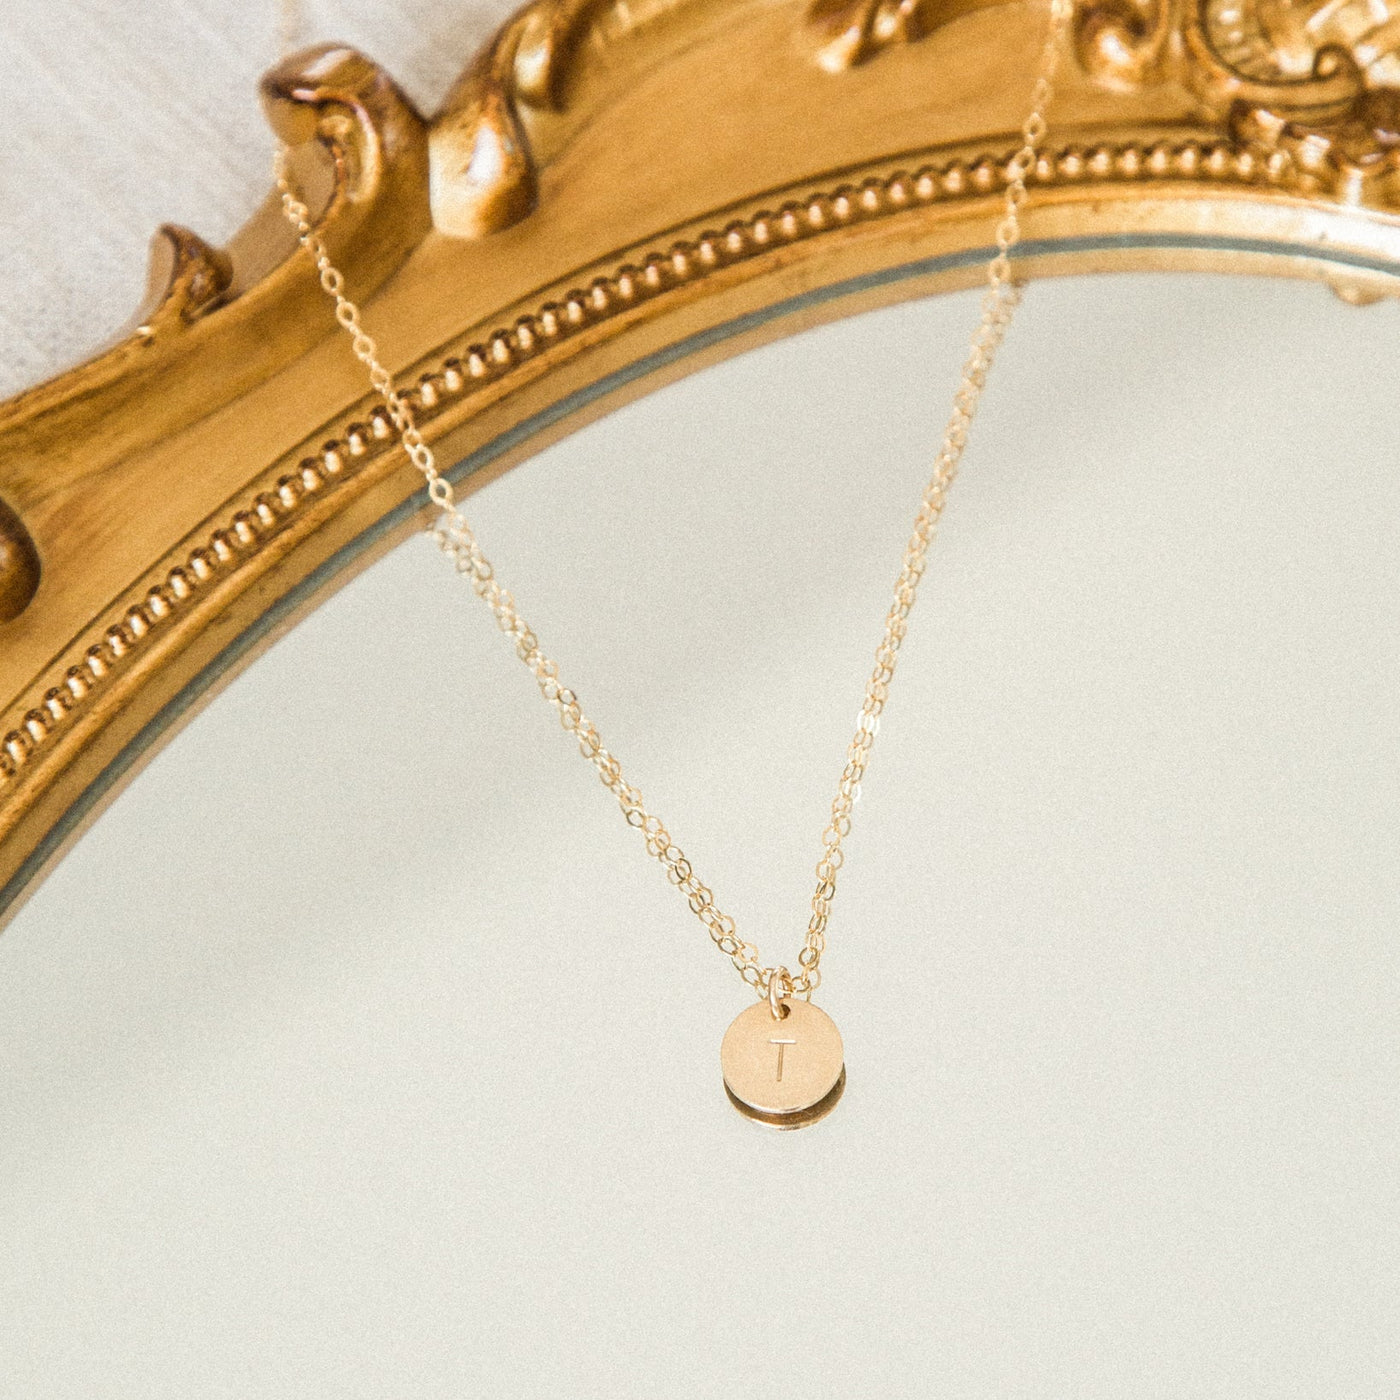 Tiny Monogram Charm Necklace GOLD Fill Initial Necklace 